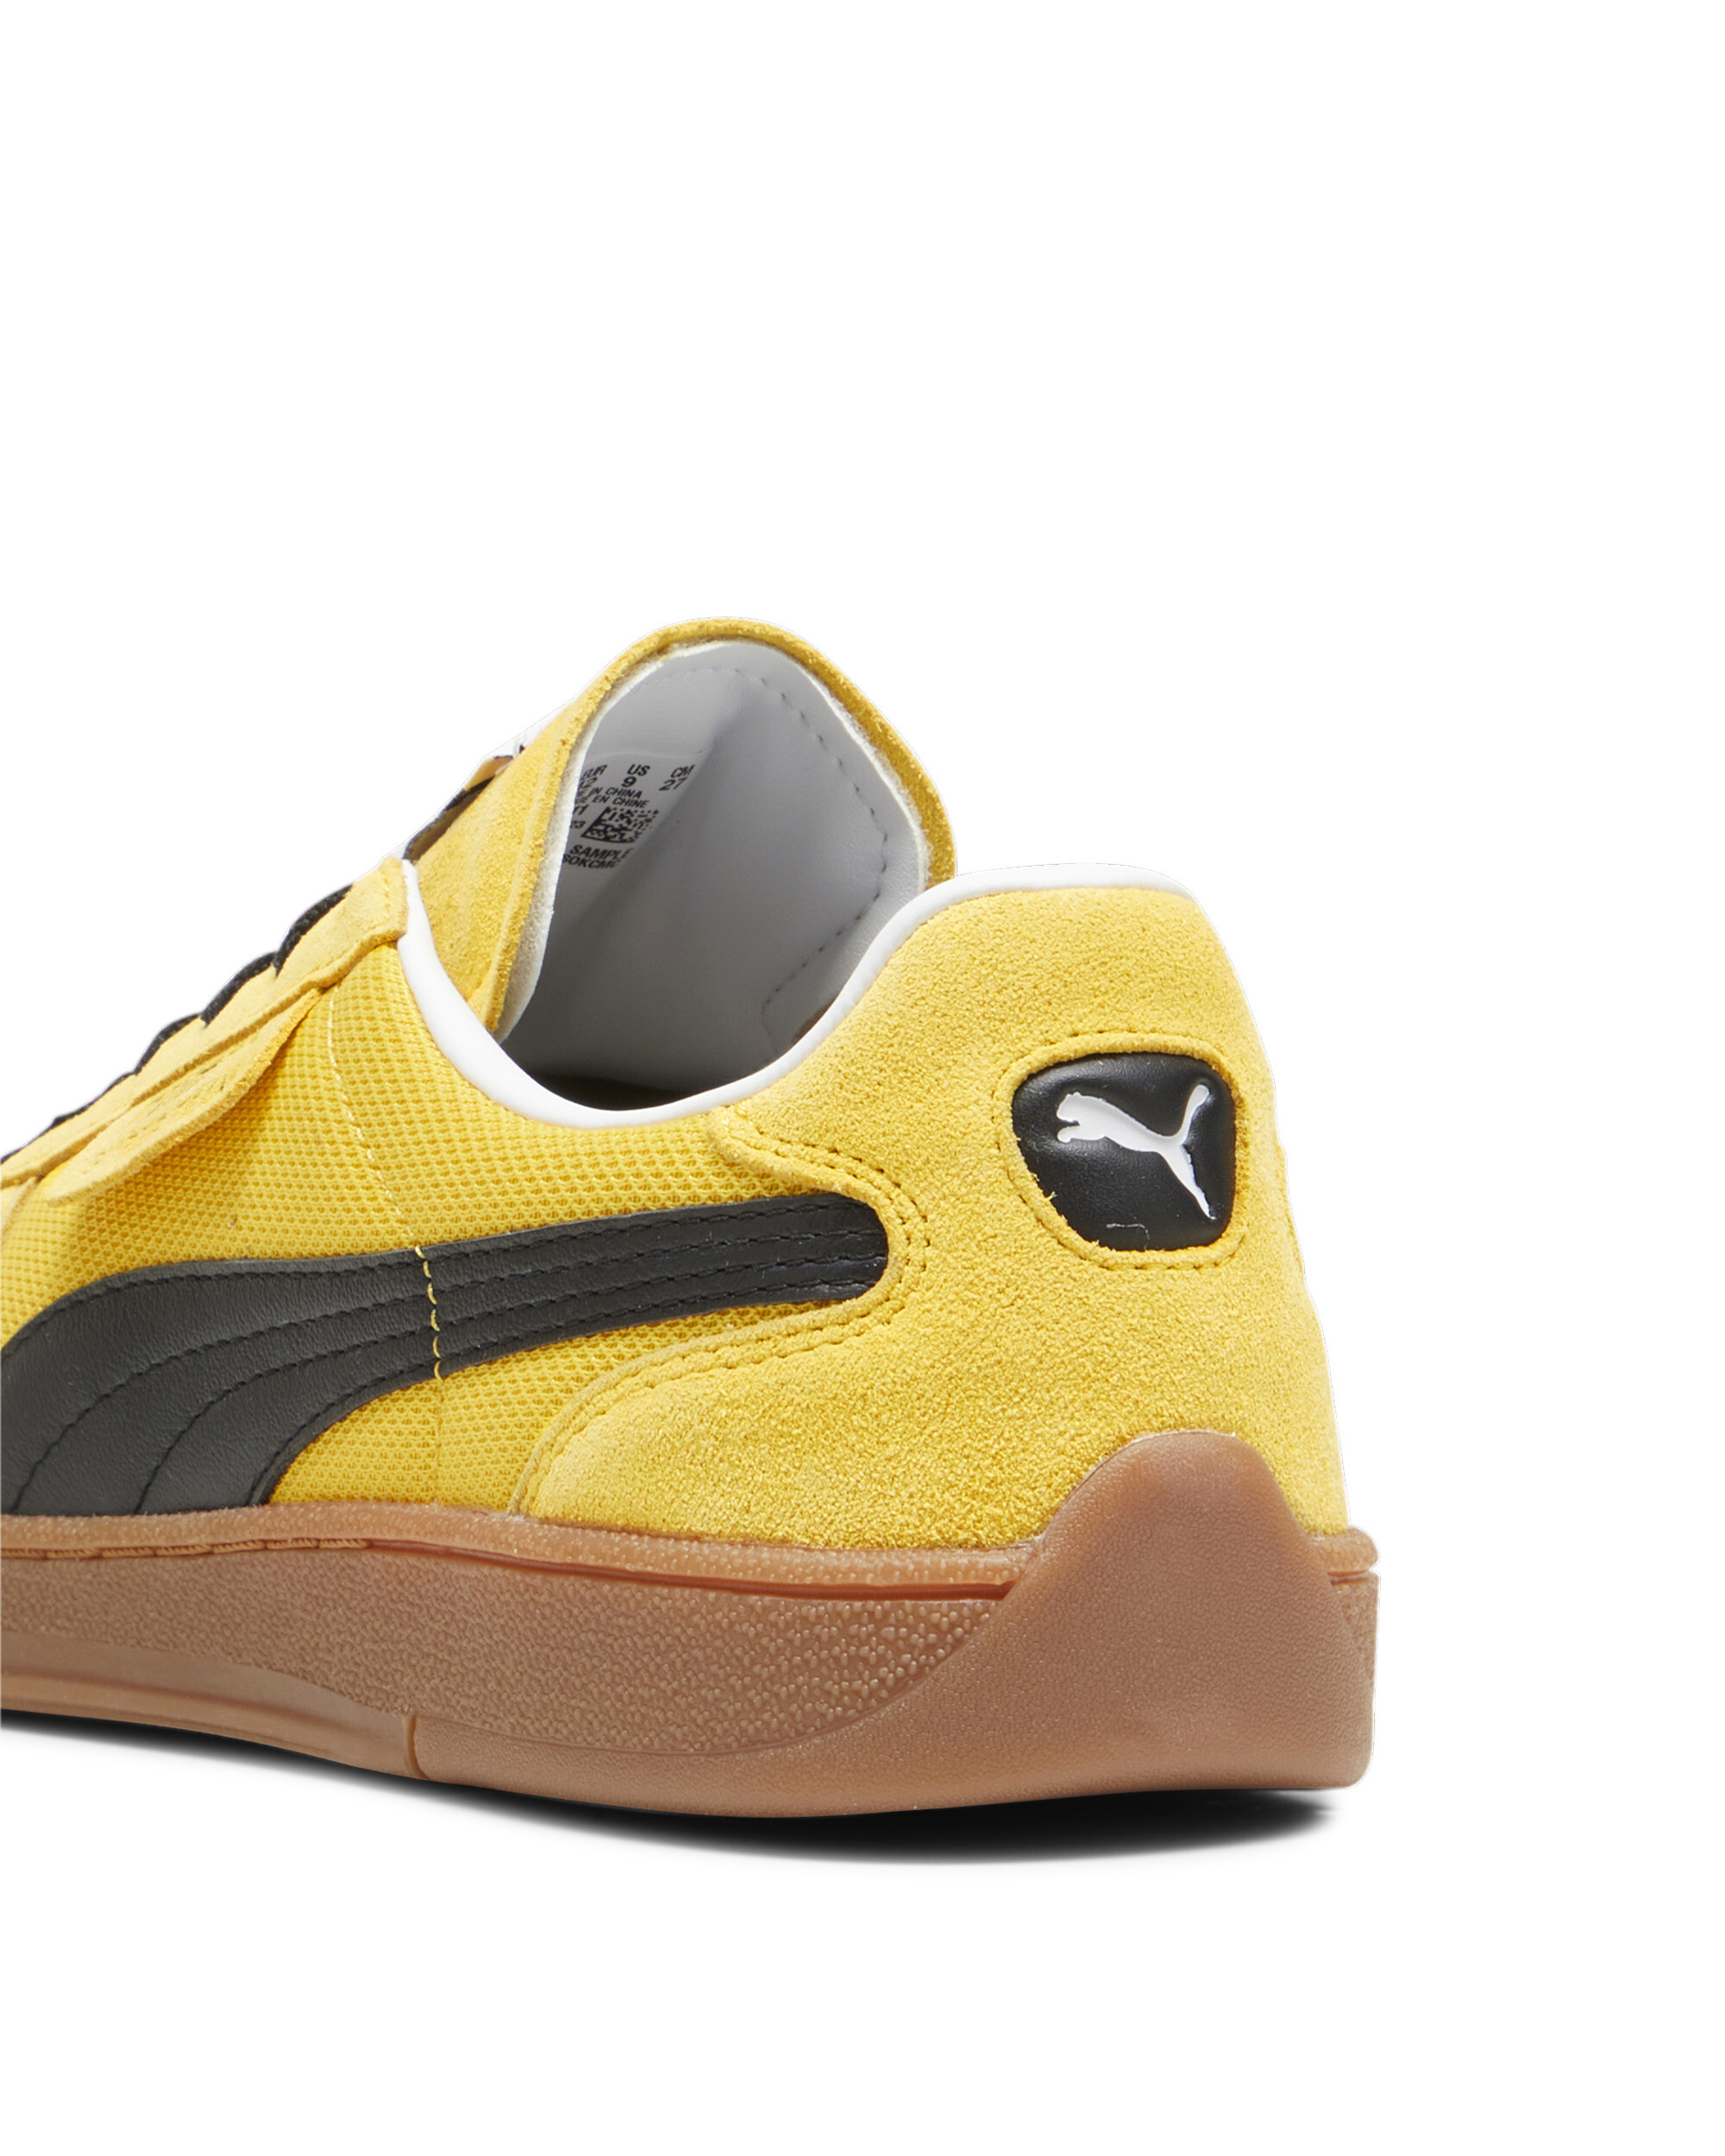 Shop Puma Sneaker Super Team Og Yellow Sizzle / Black In 11yellow Sizzle- Black